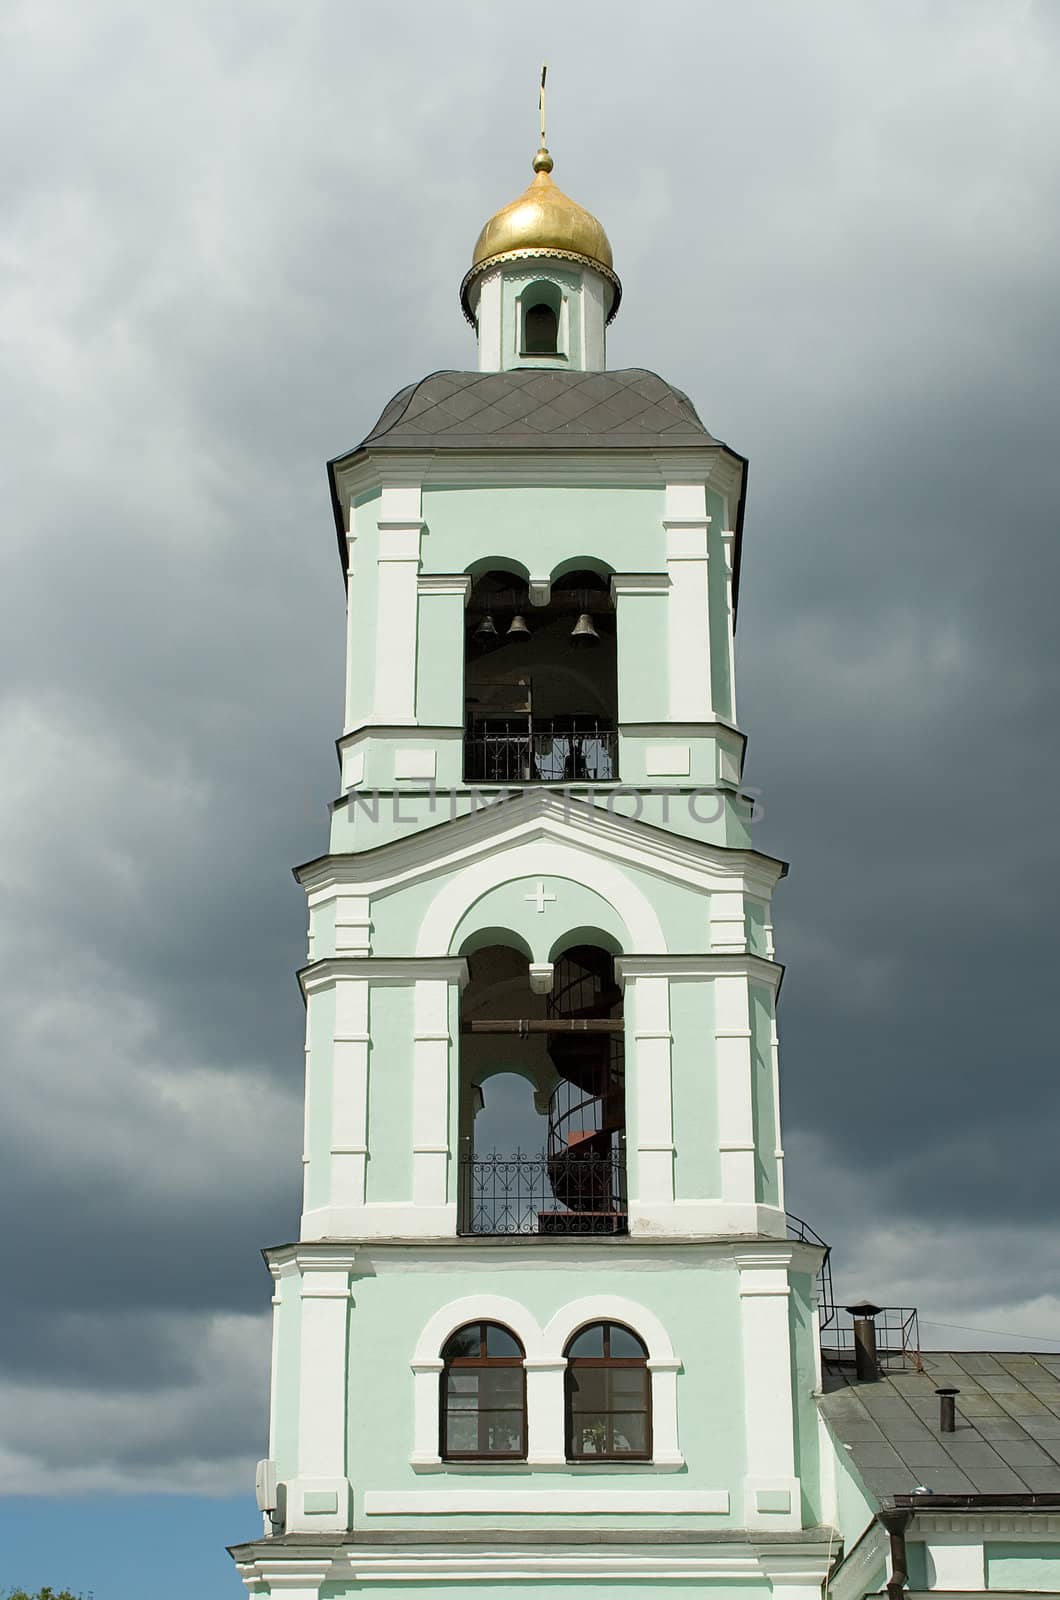 View on a bell-tower in the Tsaritsino park in Moscow.